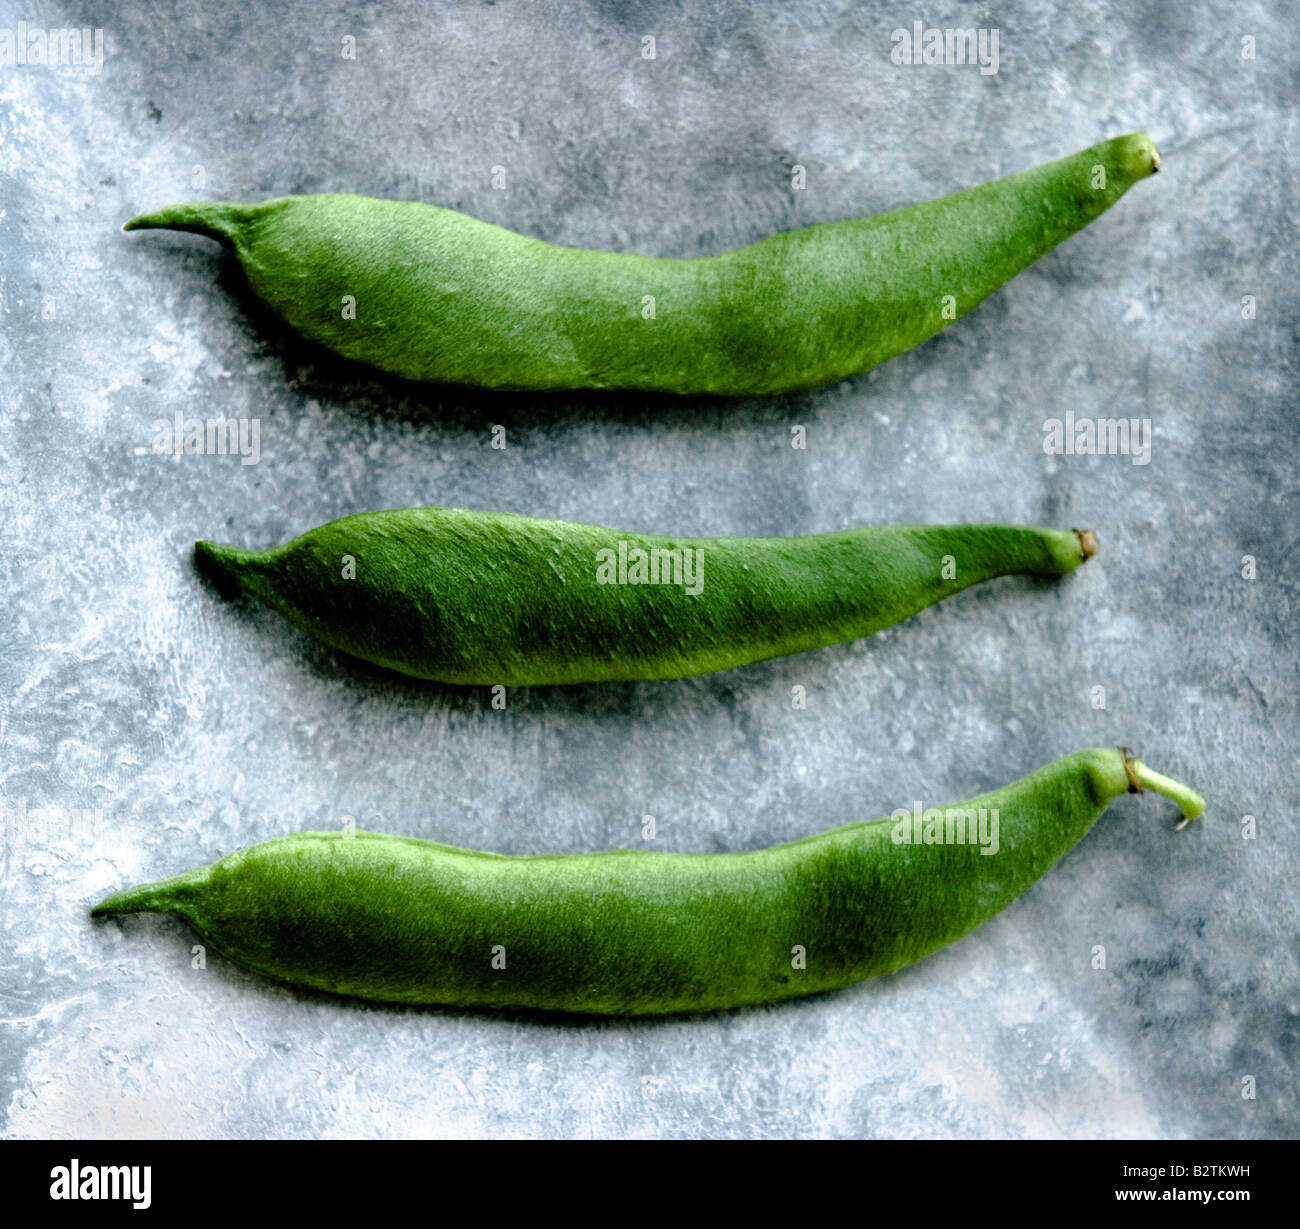 Runner Beans on a Metal Plate Stock Photo